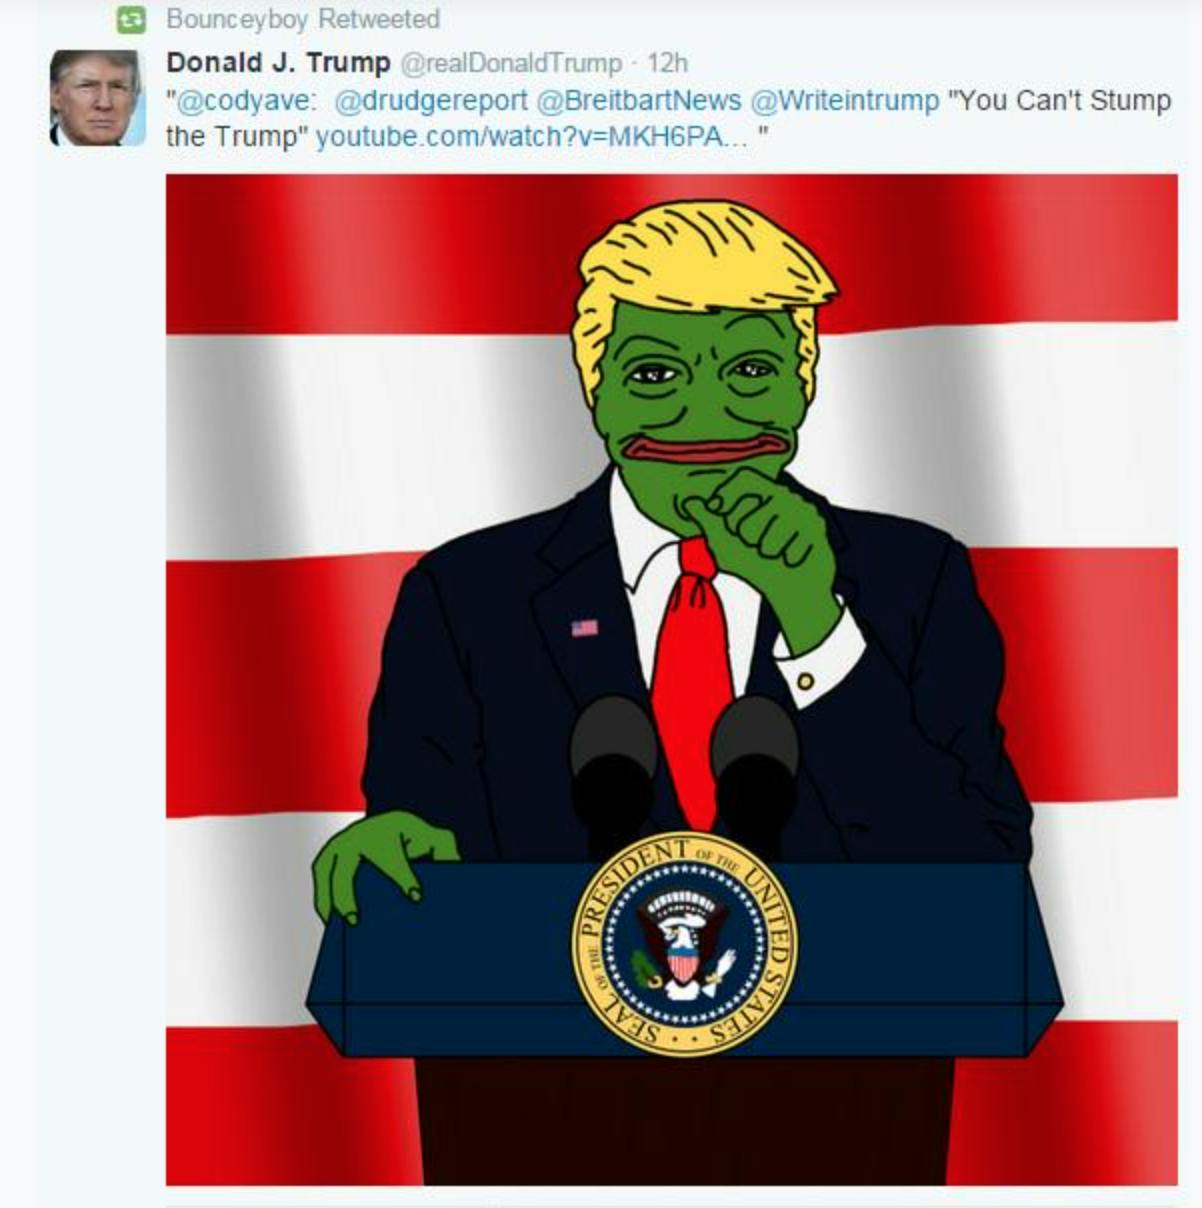 Trump as Pepe the frog